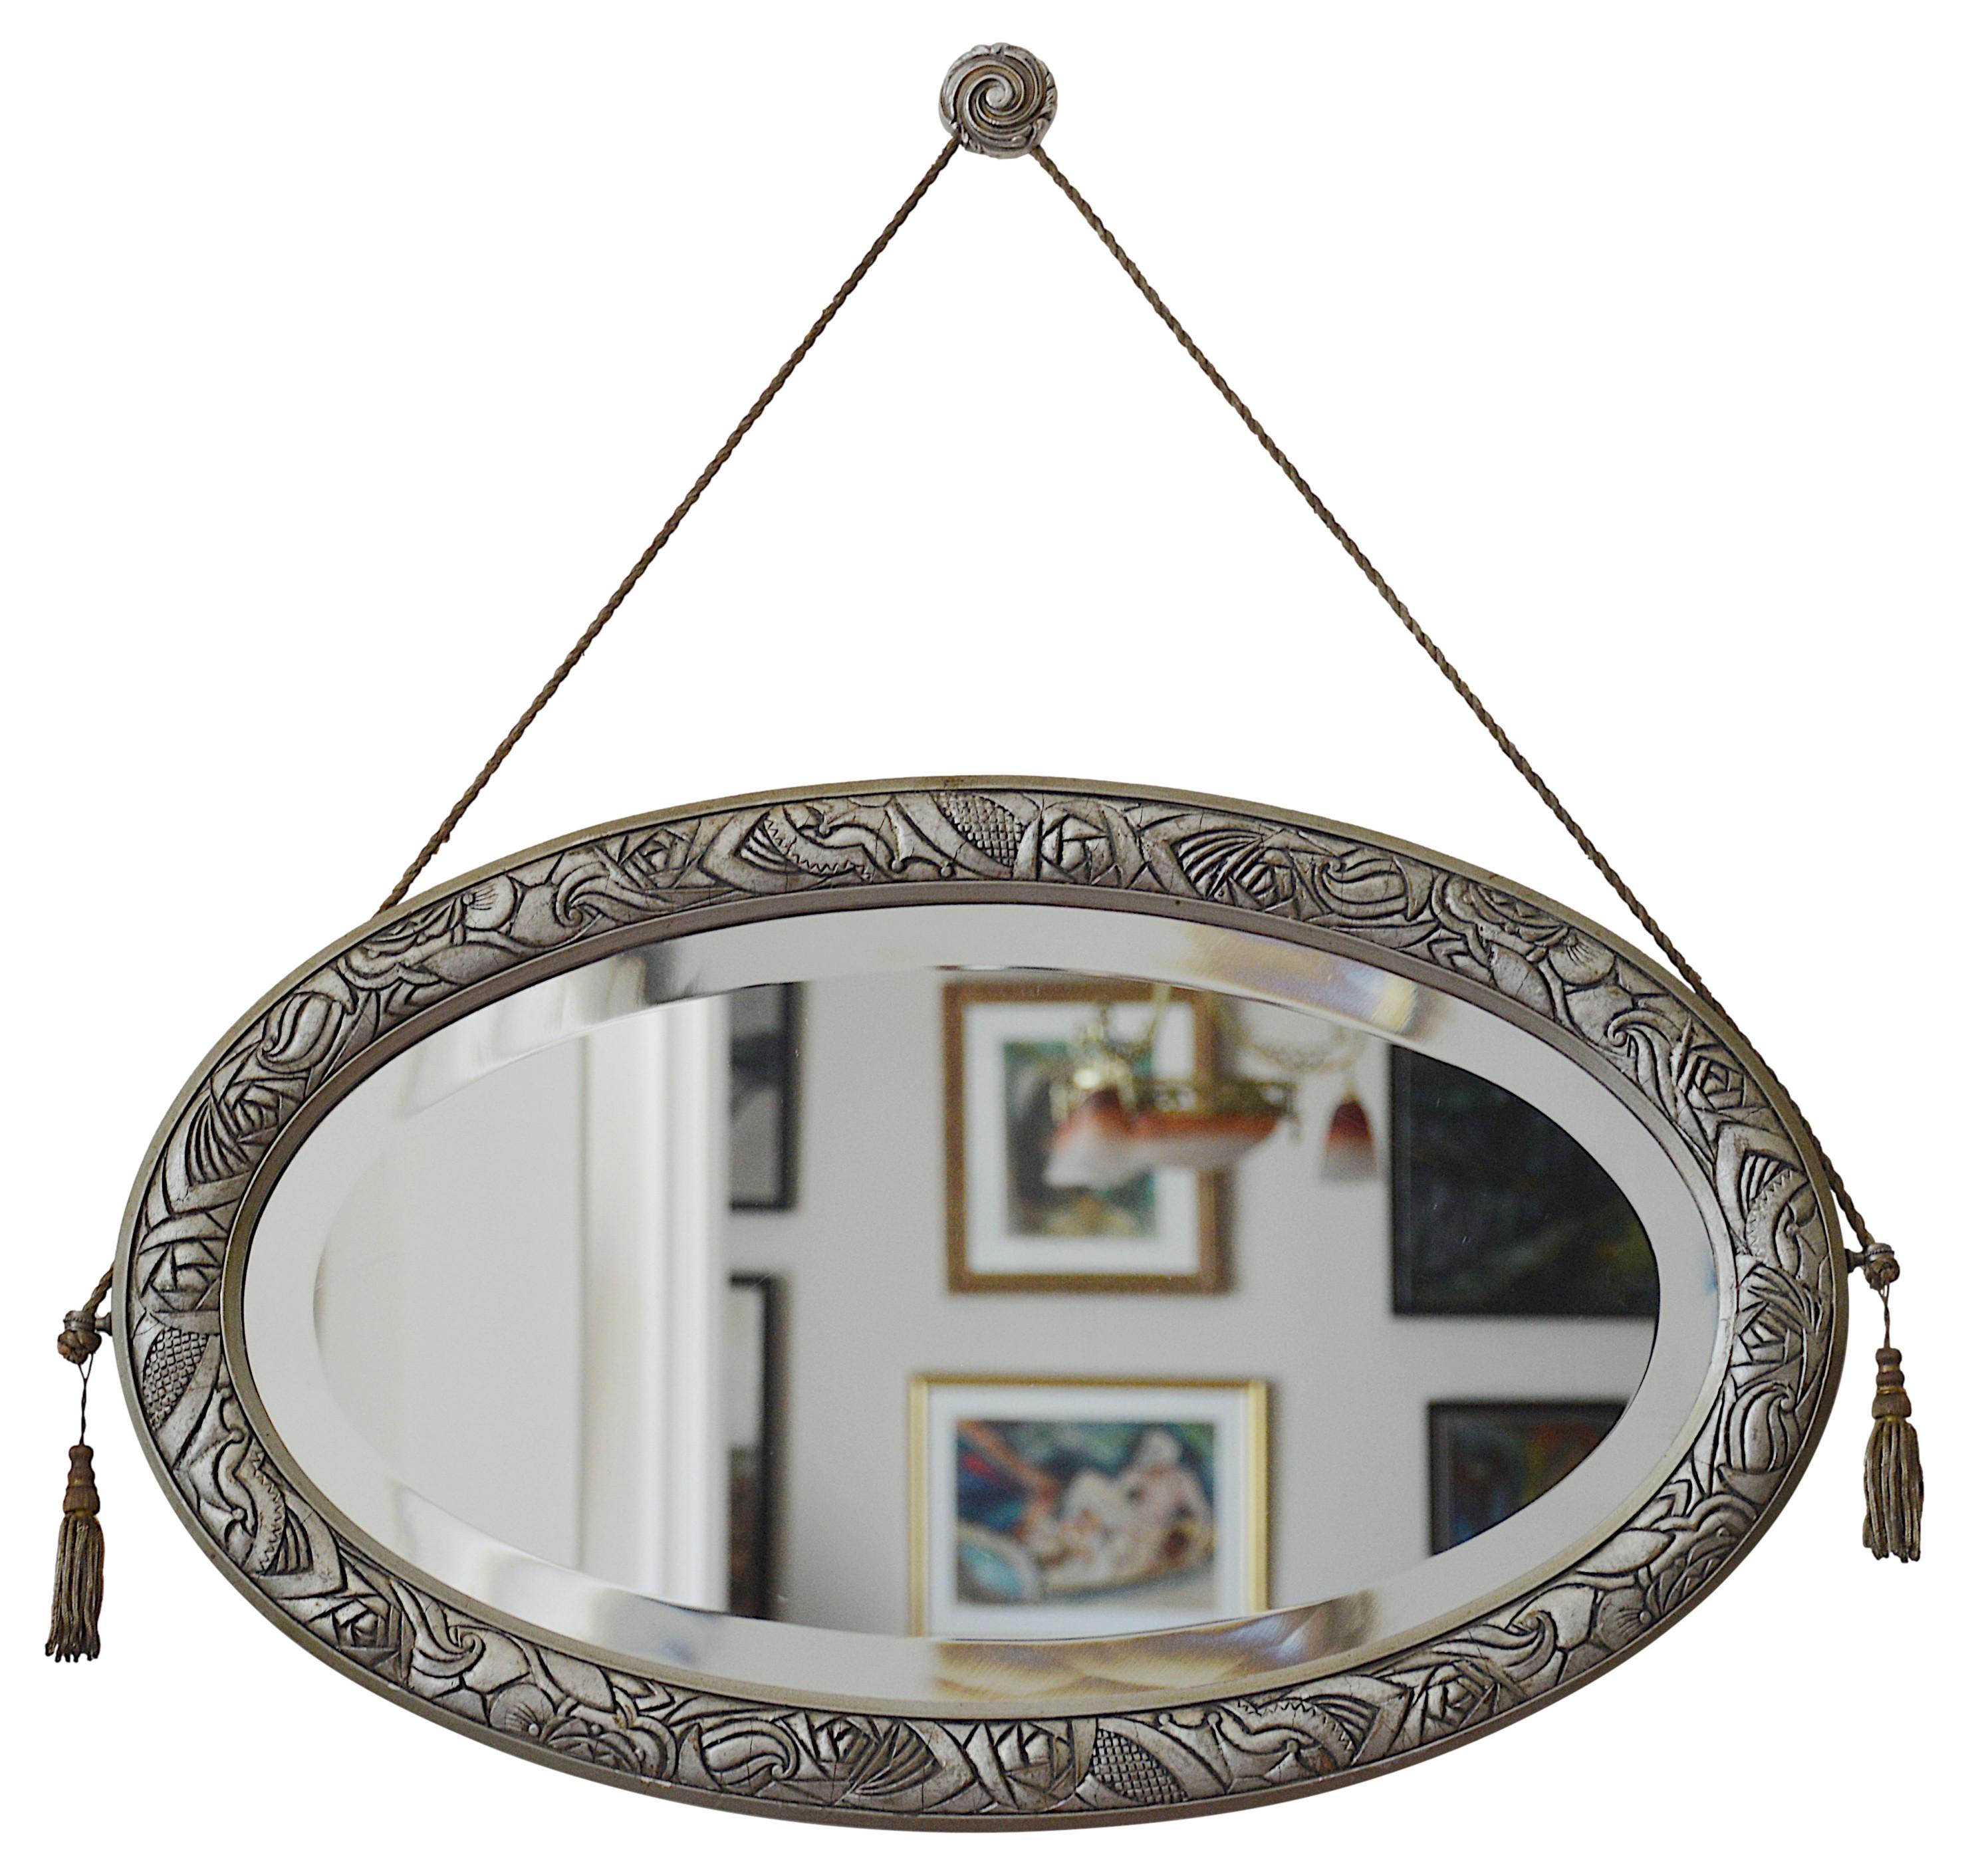 French Art Deco wall mirror, France, ca.1925. Wood, glass and bronze. Wooden frame with a stylized Art Deco pattern. 
Original beveled mirror. Solid bronze hidden-screw. Shows traces of age, this mirror is about 100 years old (see photos). Width: